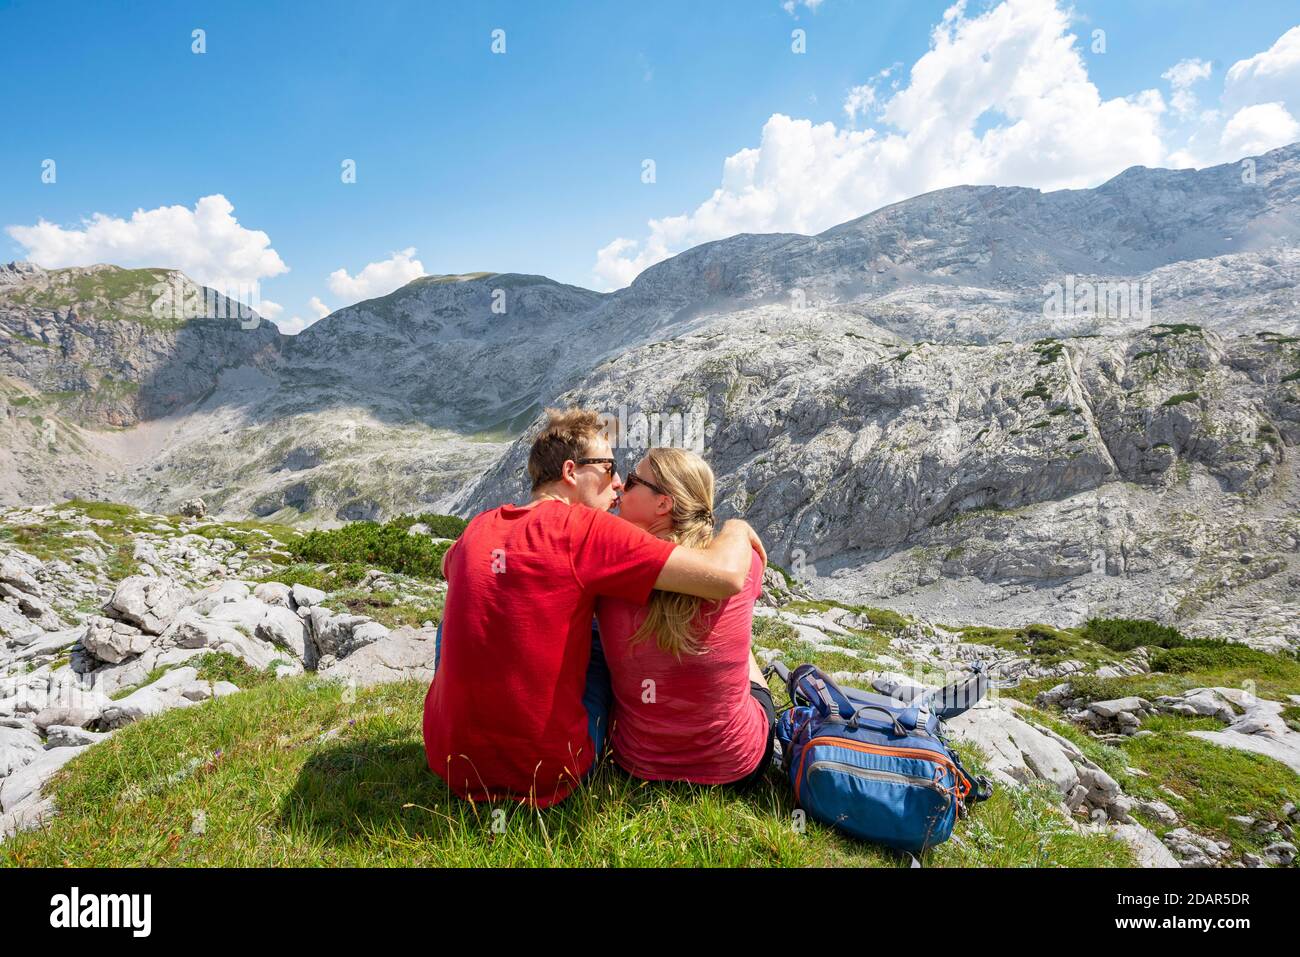 Couples hiking, young man and young woman kissing, Steinernes Meer, Berchtesgaden National Park, Berchtesgadener Land, Upper Bavaria, Bavaria, Germany Stock Photo